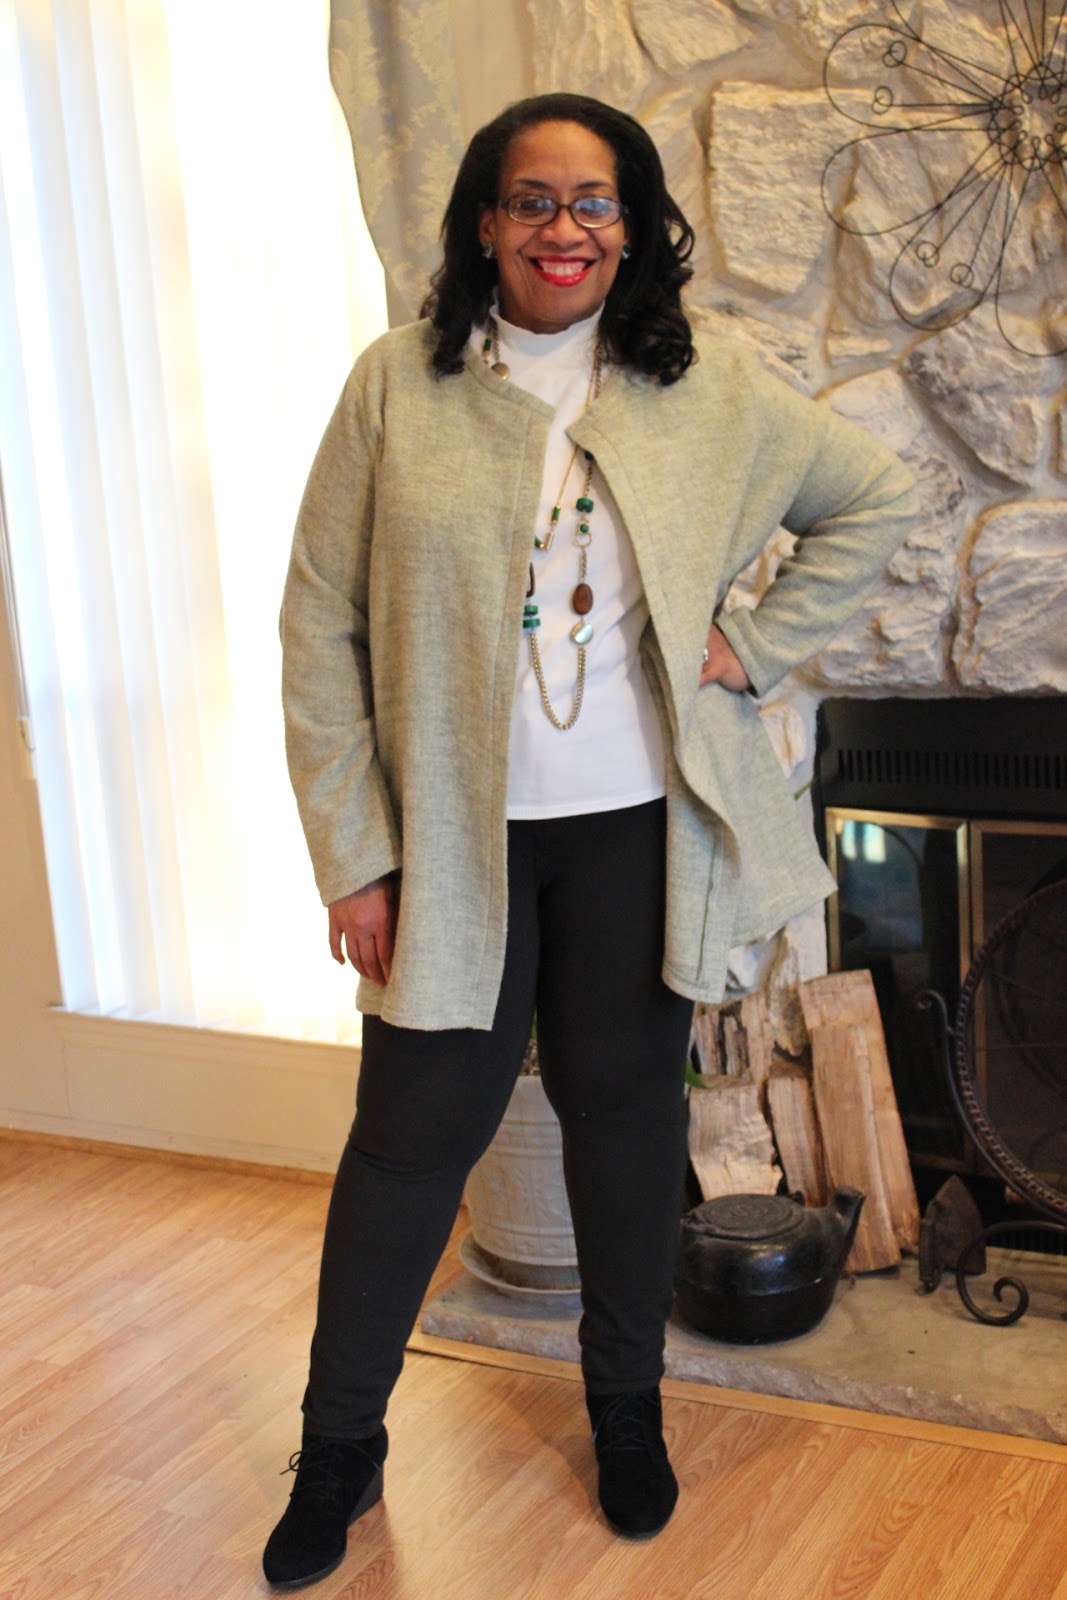 Diary of a Sewing Fanatic: Butterick 5790 - A Sweater Cardigan